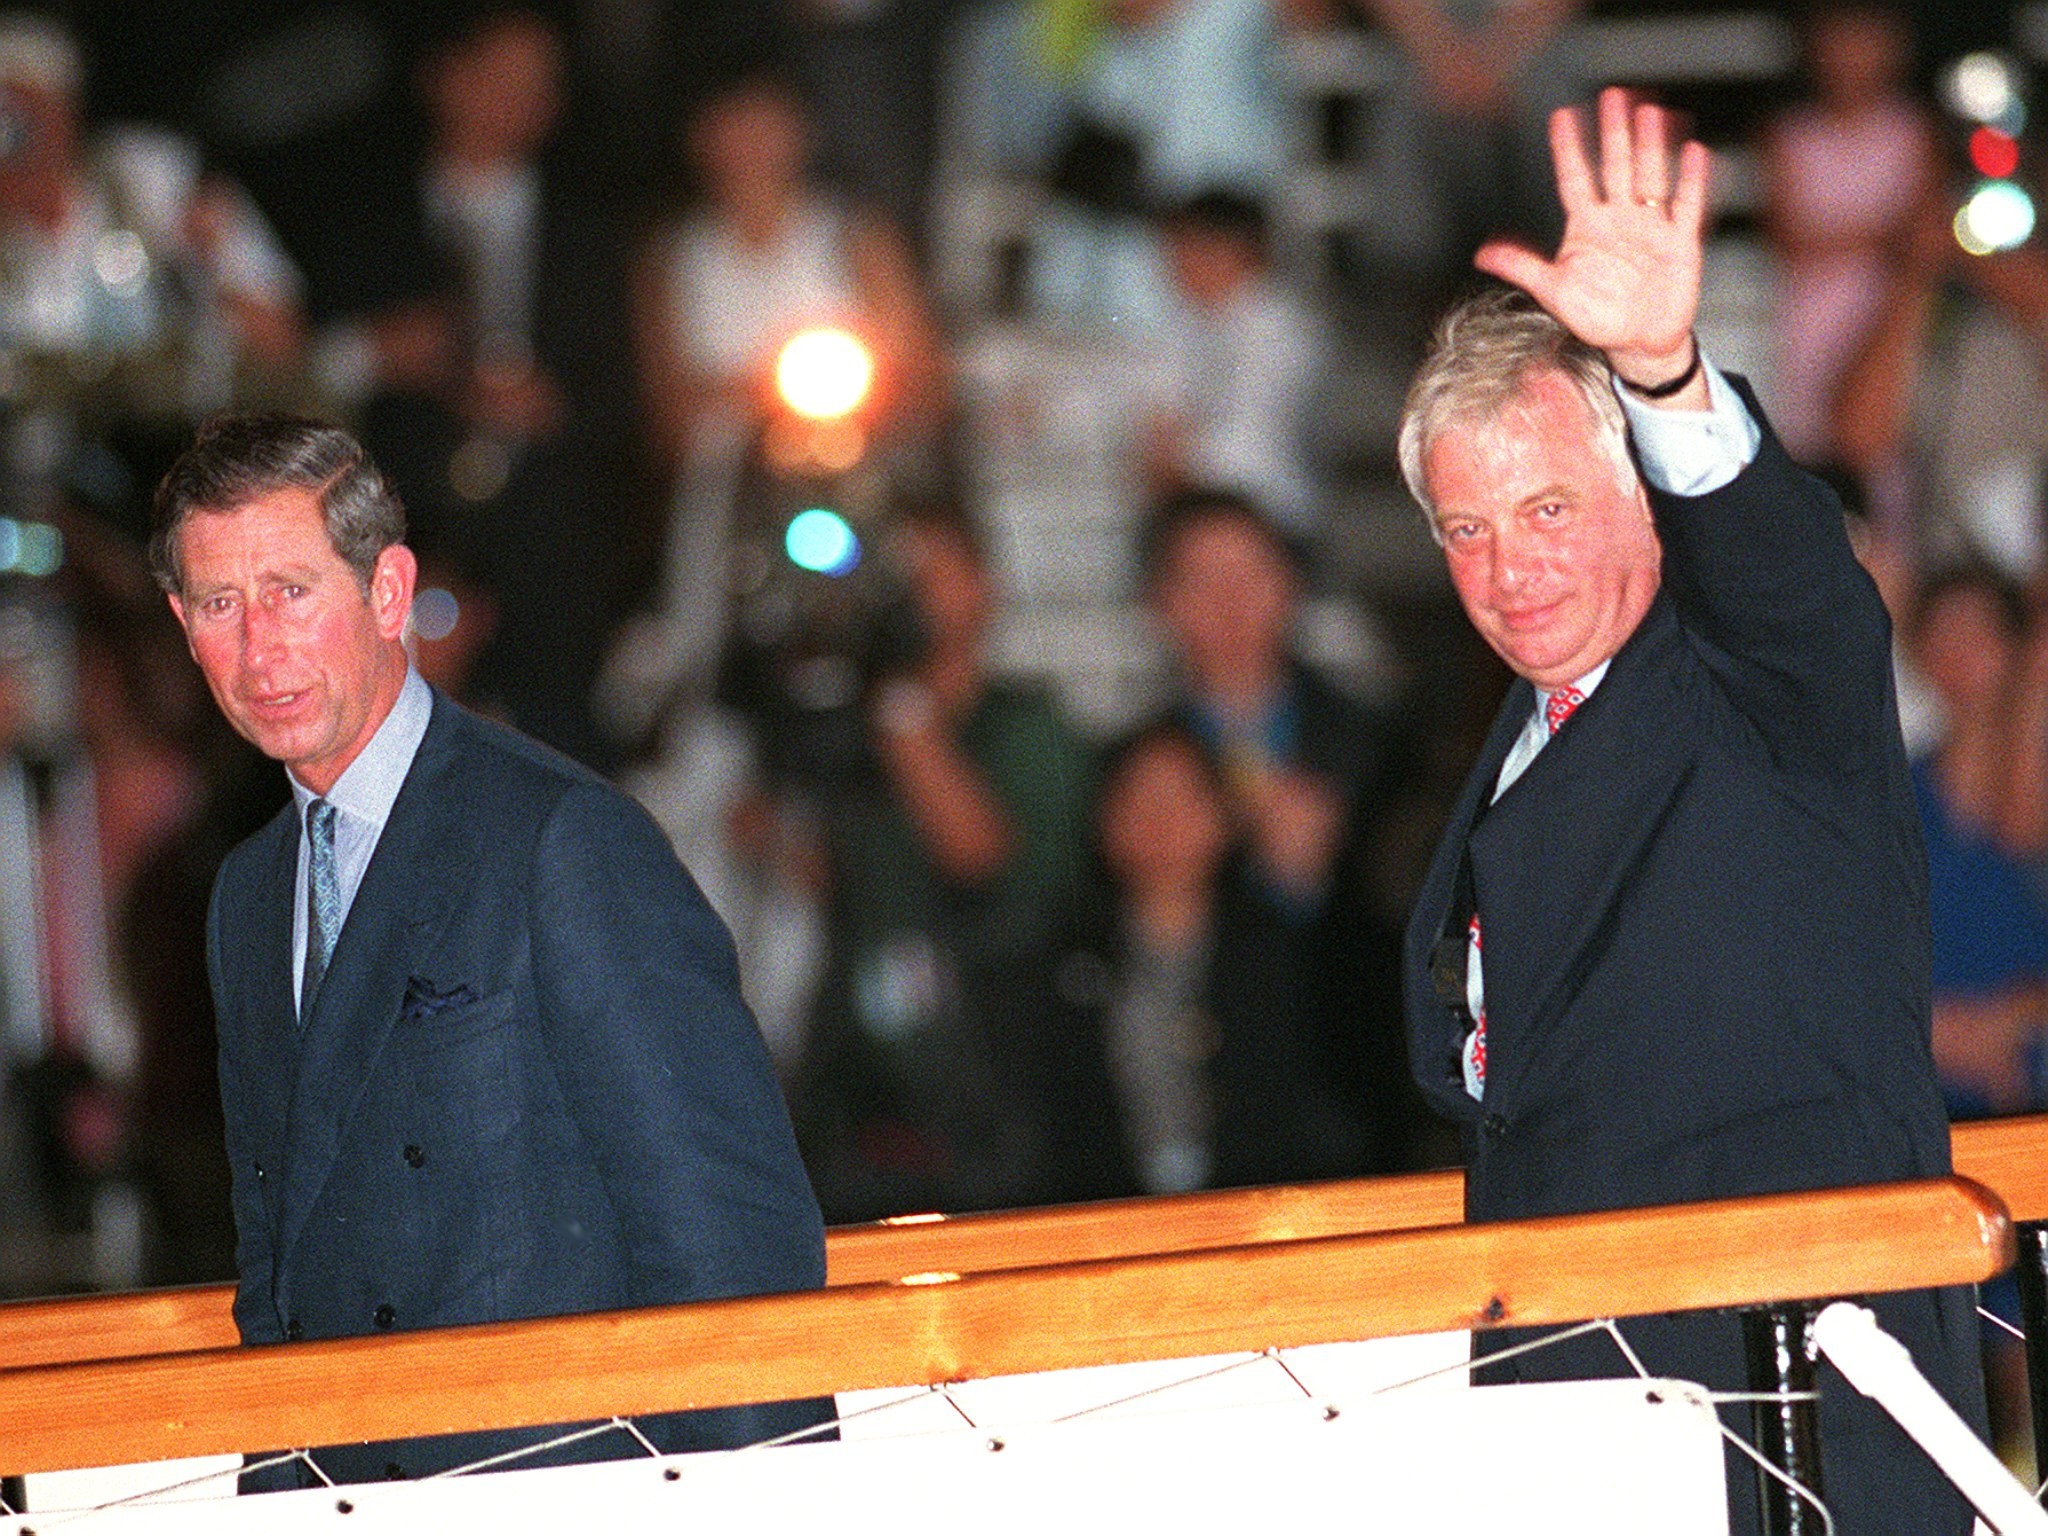 Hong Kong’s last governor Chris Patten (right) waves to well-wishers as he boards the Royal Yacht Britannia accompanied by Prince Charles prior to their departure from Hong Kong. Photo: AFP Romeo Gacad